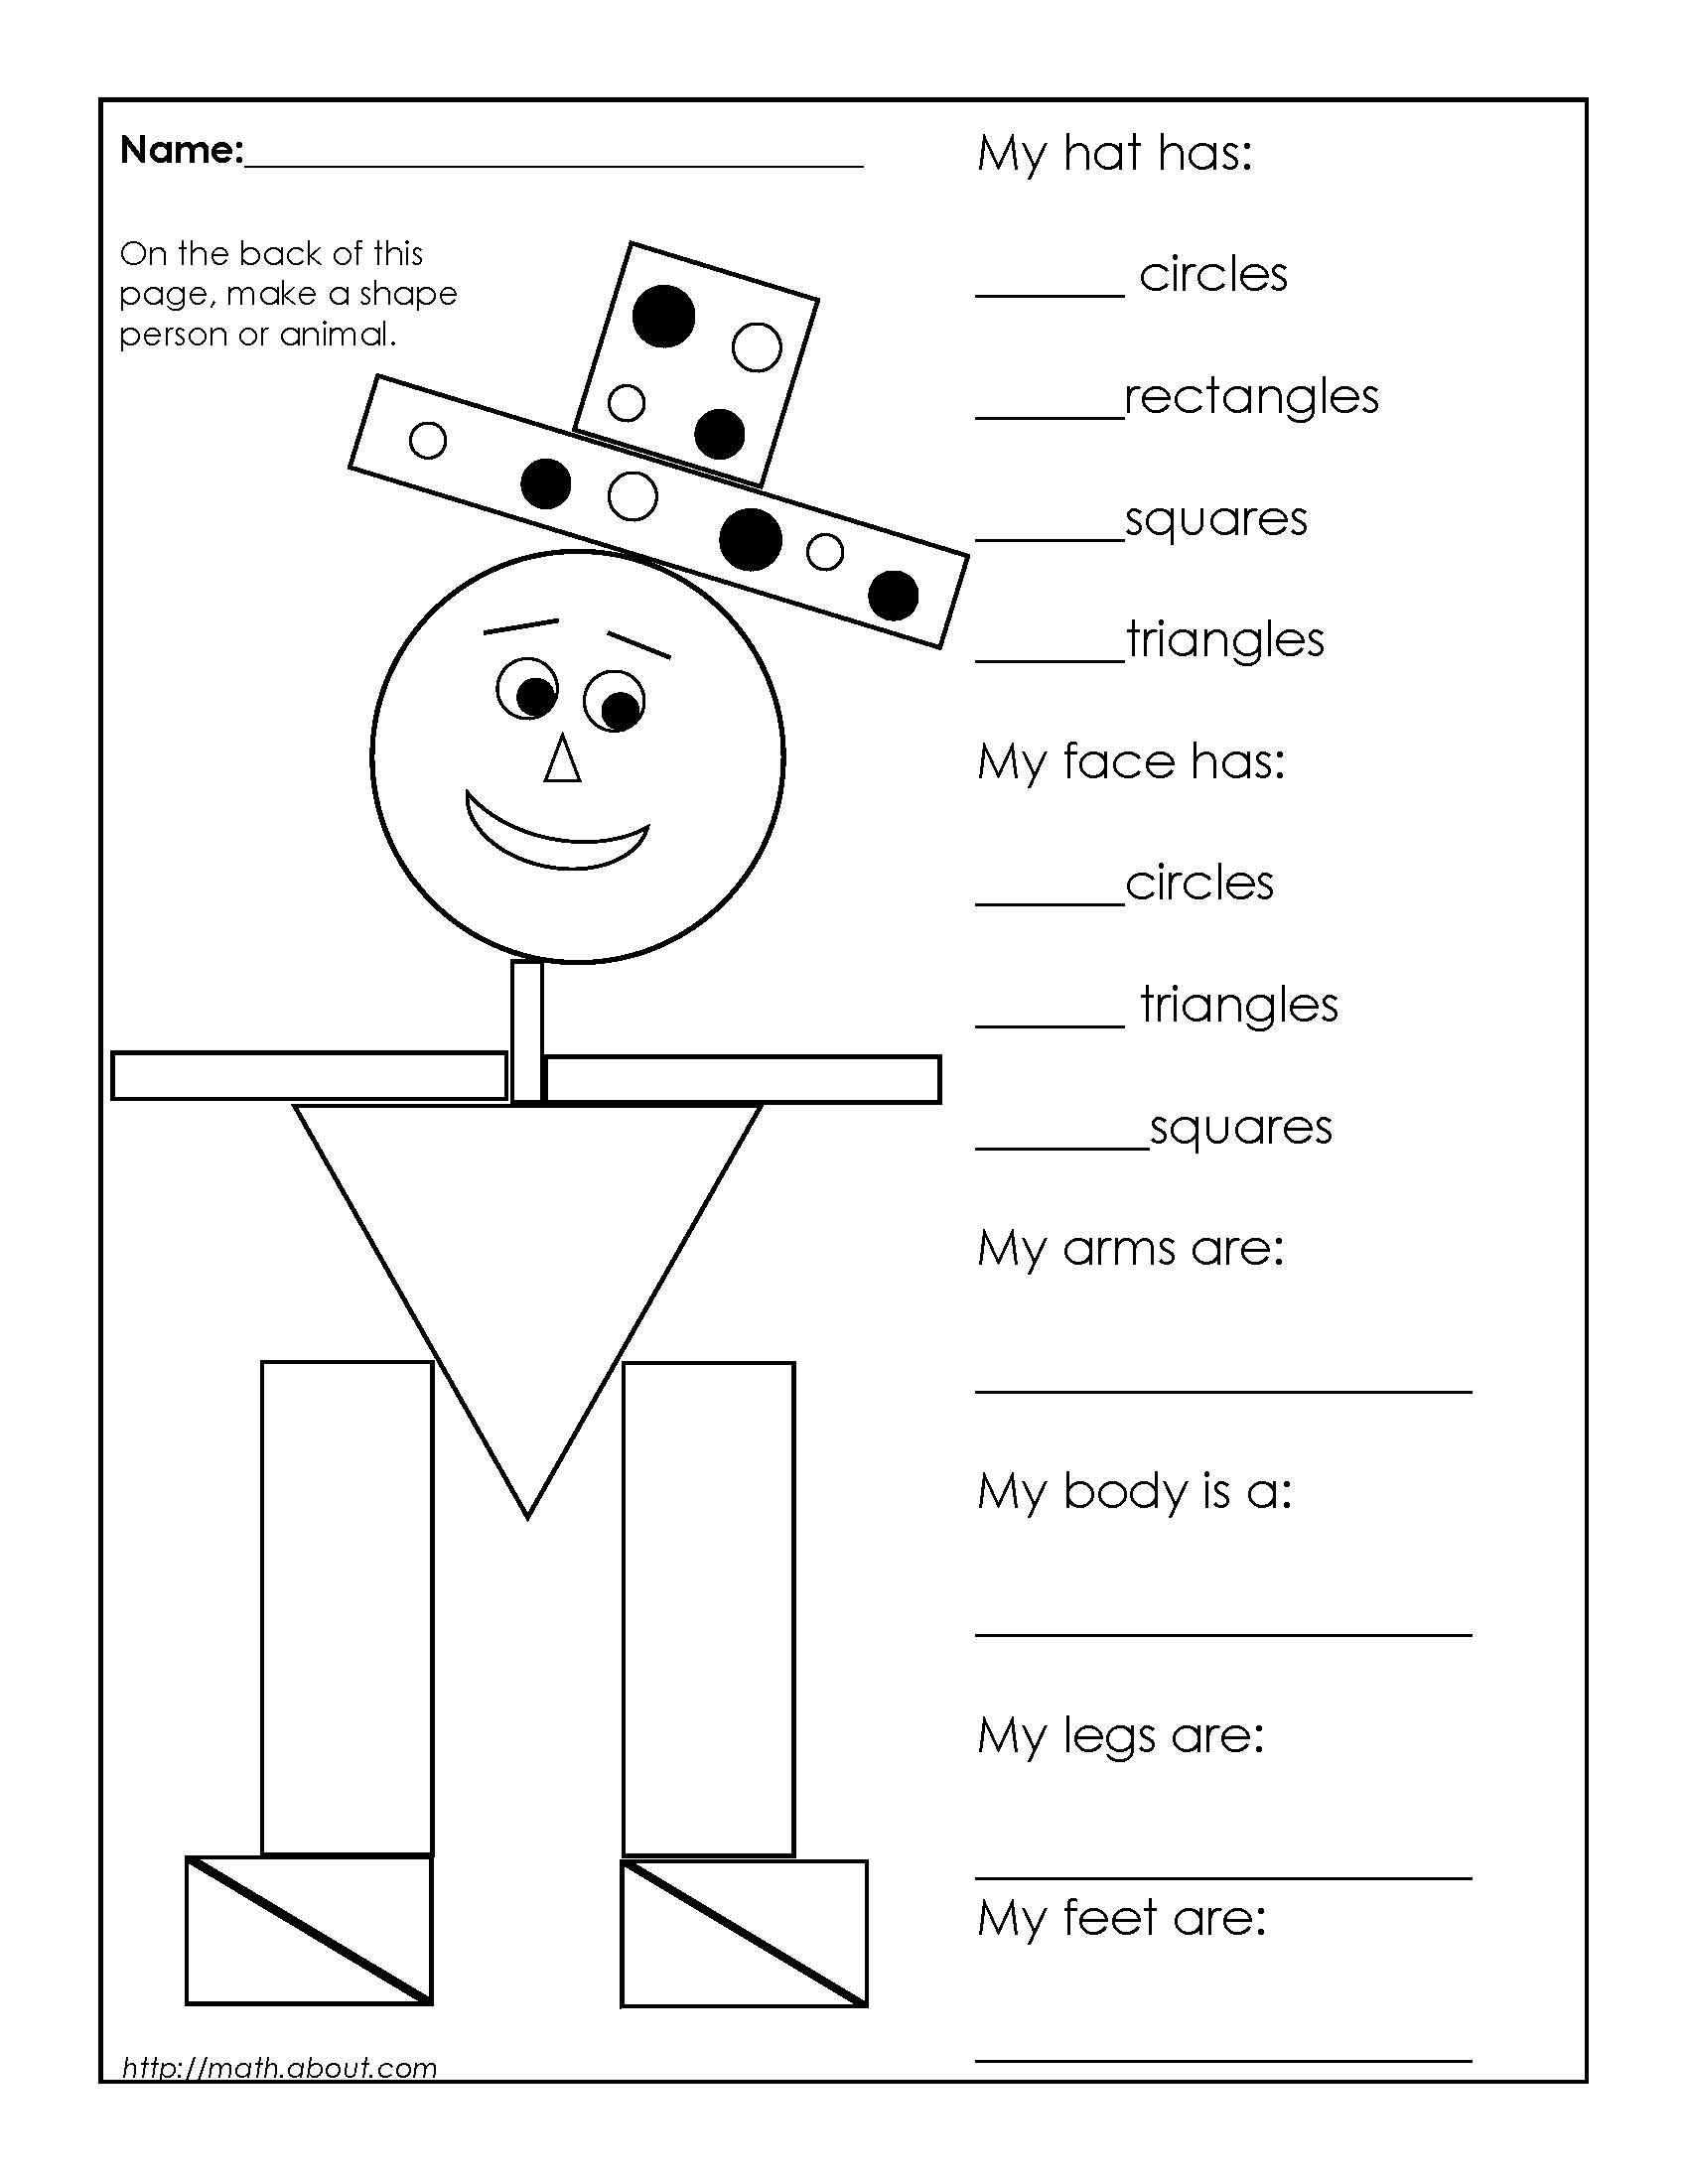 Cartoon Analysis Worksheet Answer Key Along with Groundworks Math Worksheets Answers